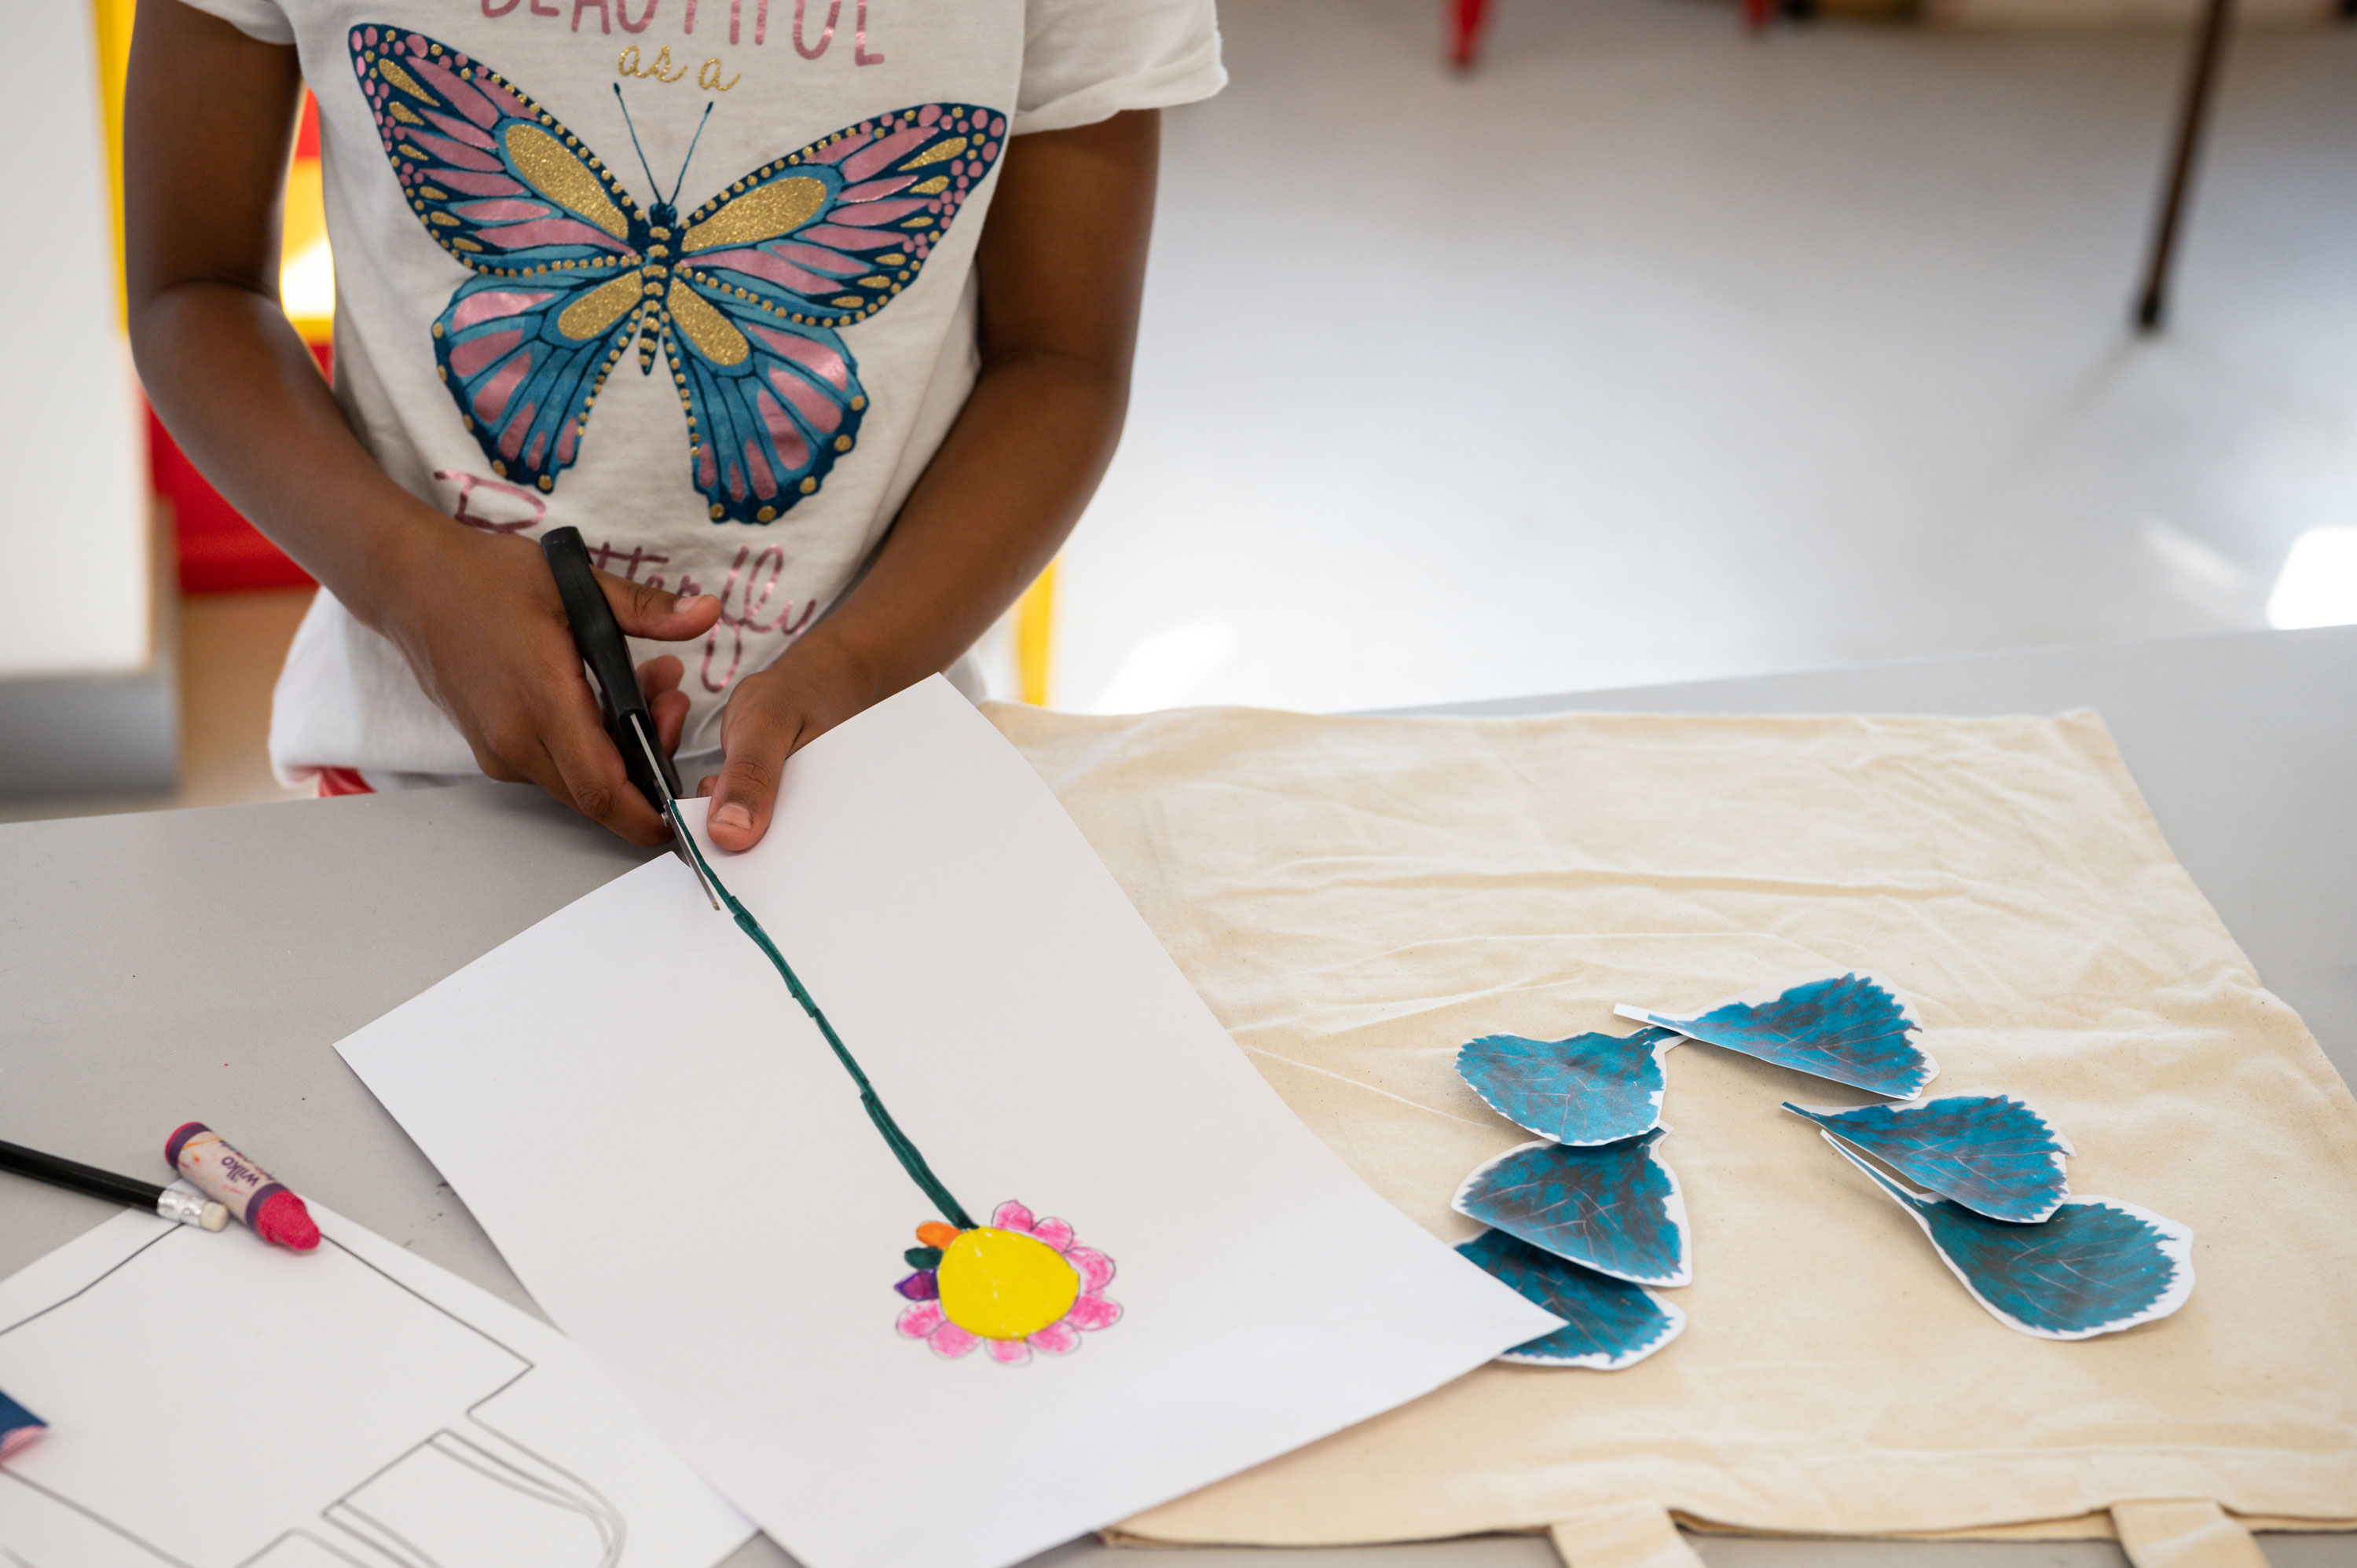 A young person using scissors to cut out a drawing of a long green, pink and yellow flower